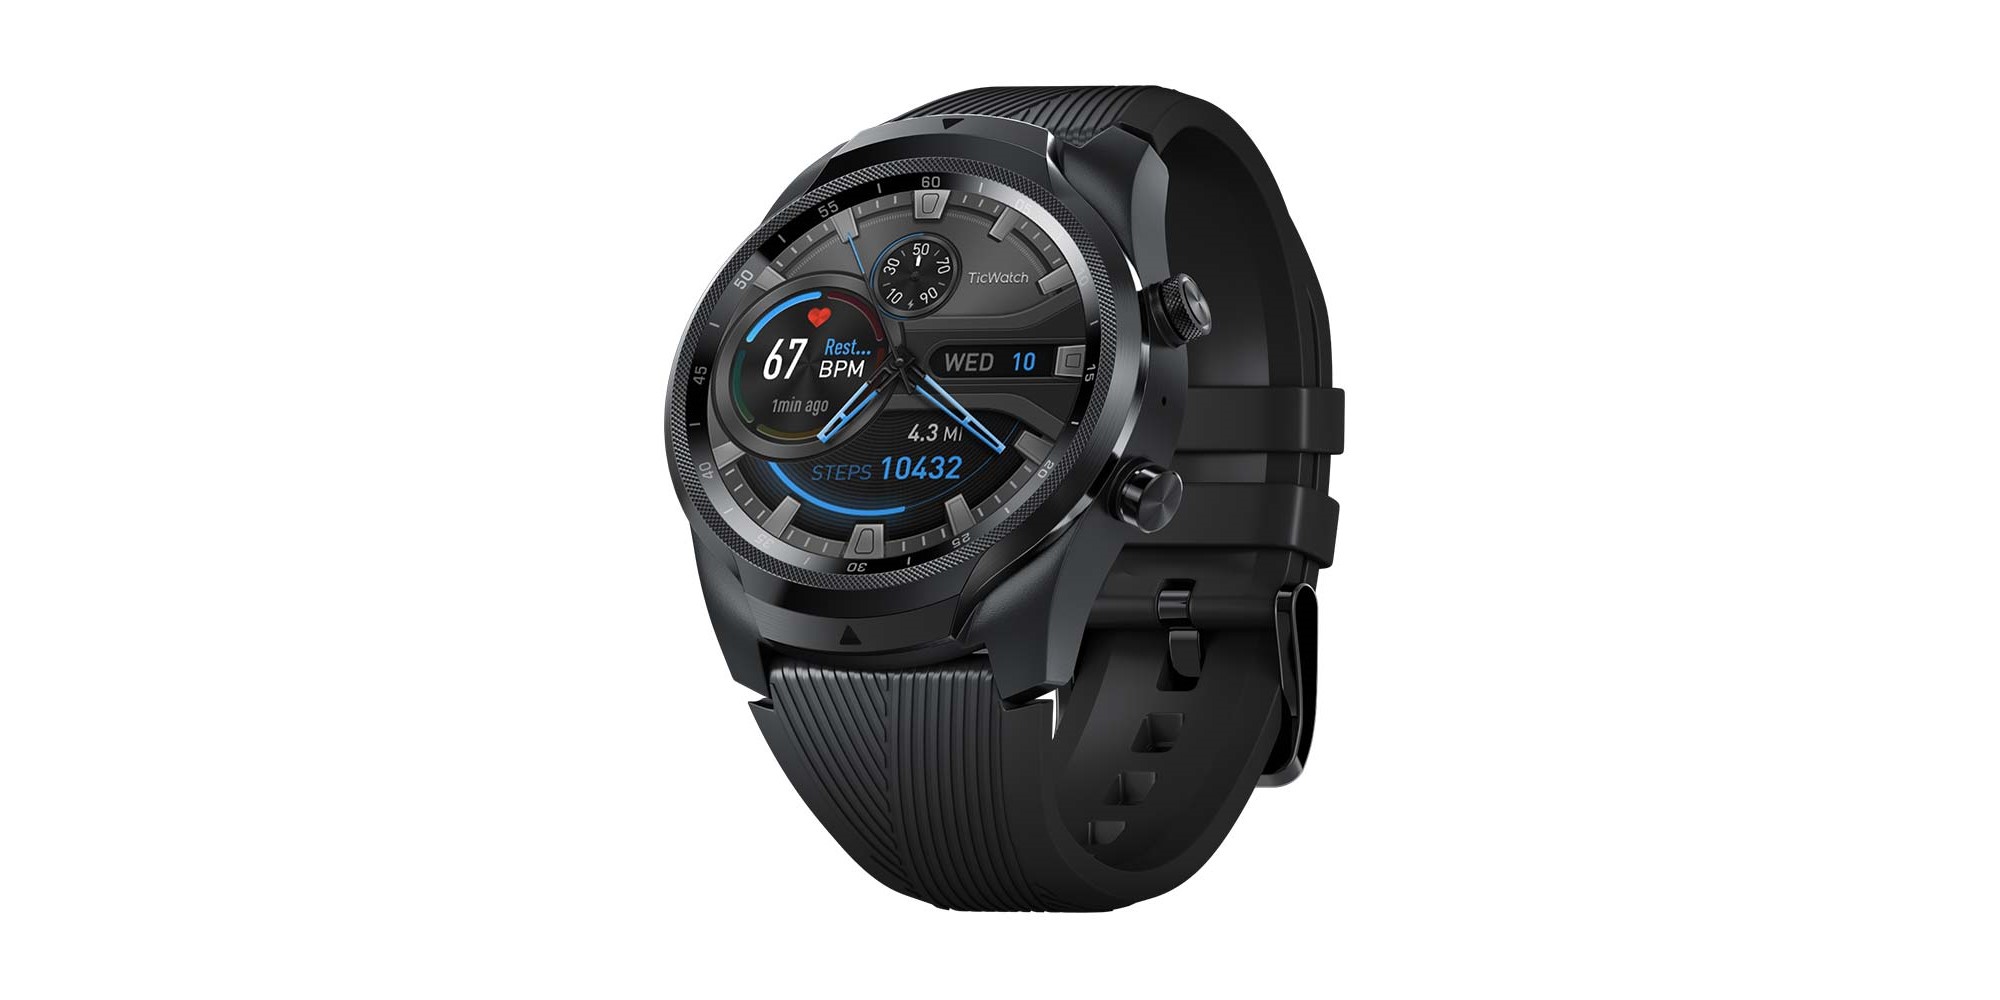 The TicWatch Pro 4G/LTE gets a 25% discount